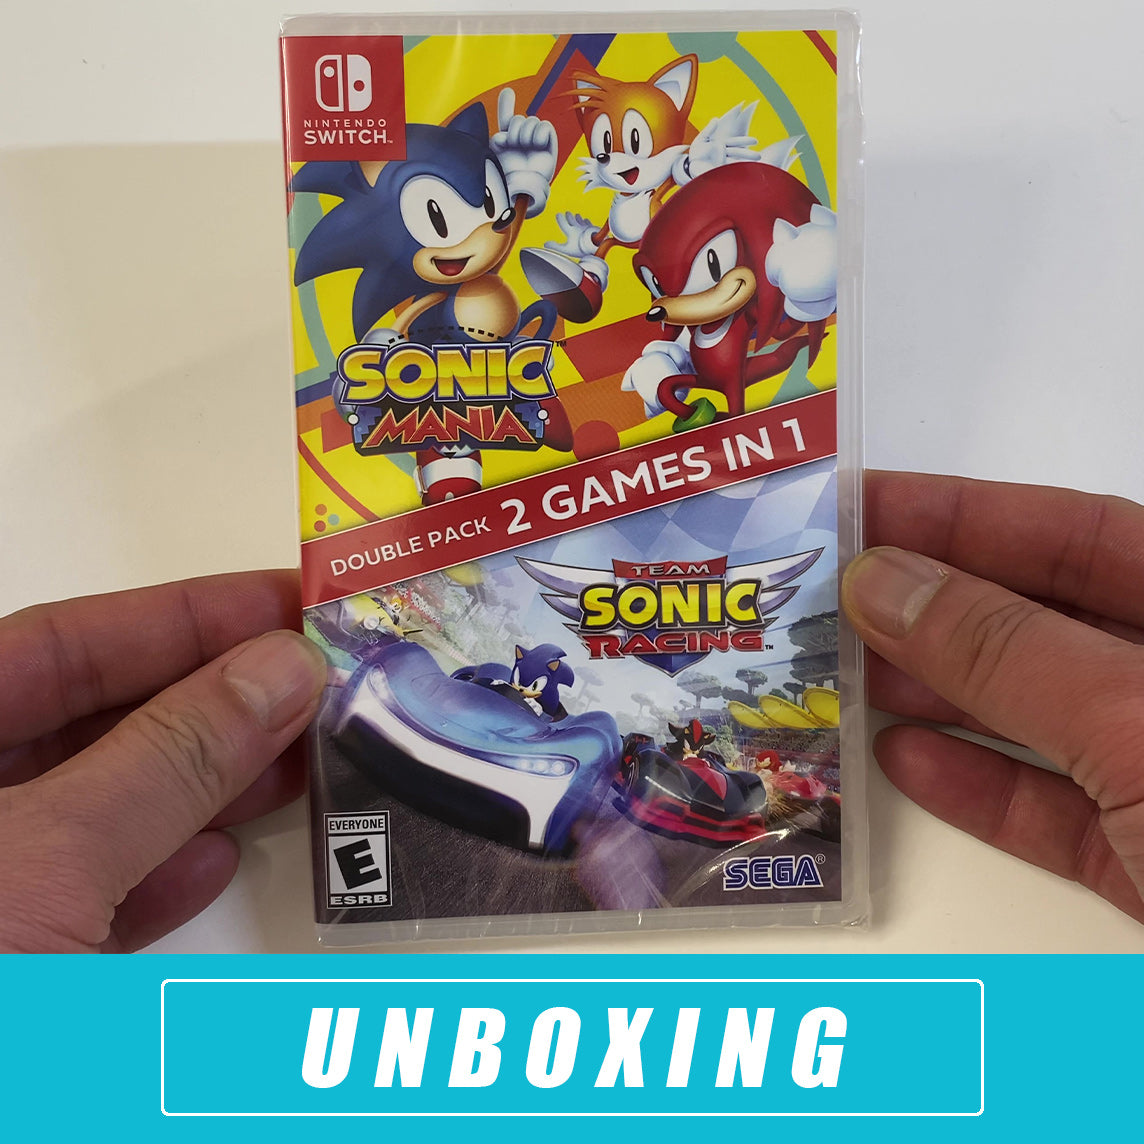 Sonic Mania + Team Sonic Racing Double Pack - (NSW) Nintendo Switch [UNBOXING] Video Games SEGA   